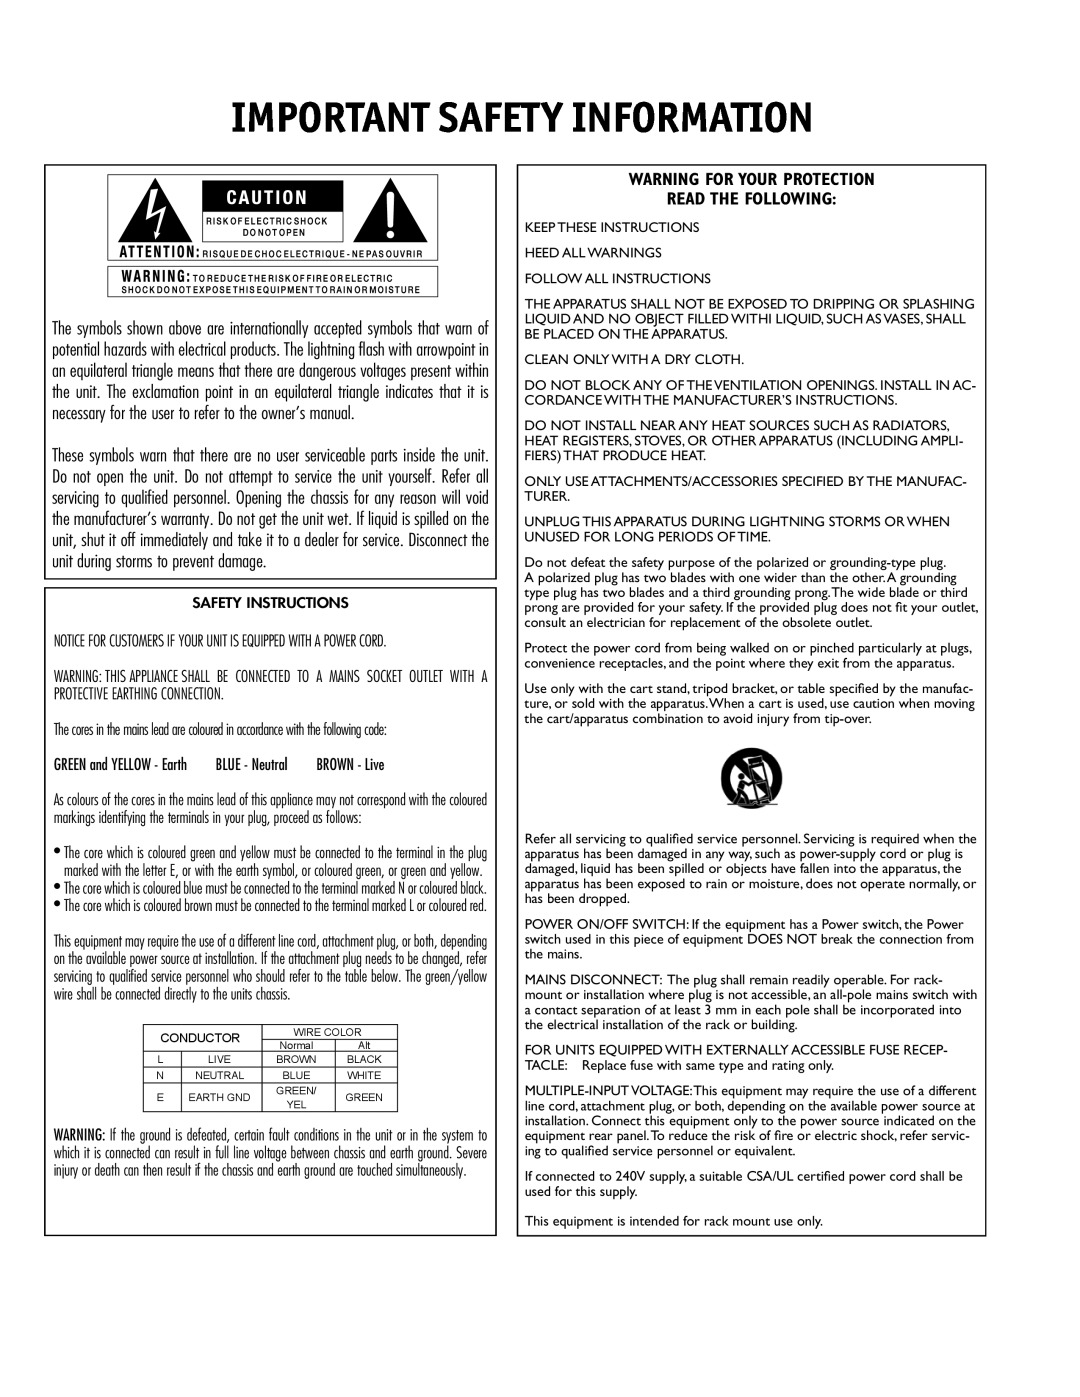 JBL 260 user manual Important Safety Information, Warning For Your Protection Read The Following 